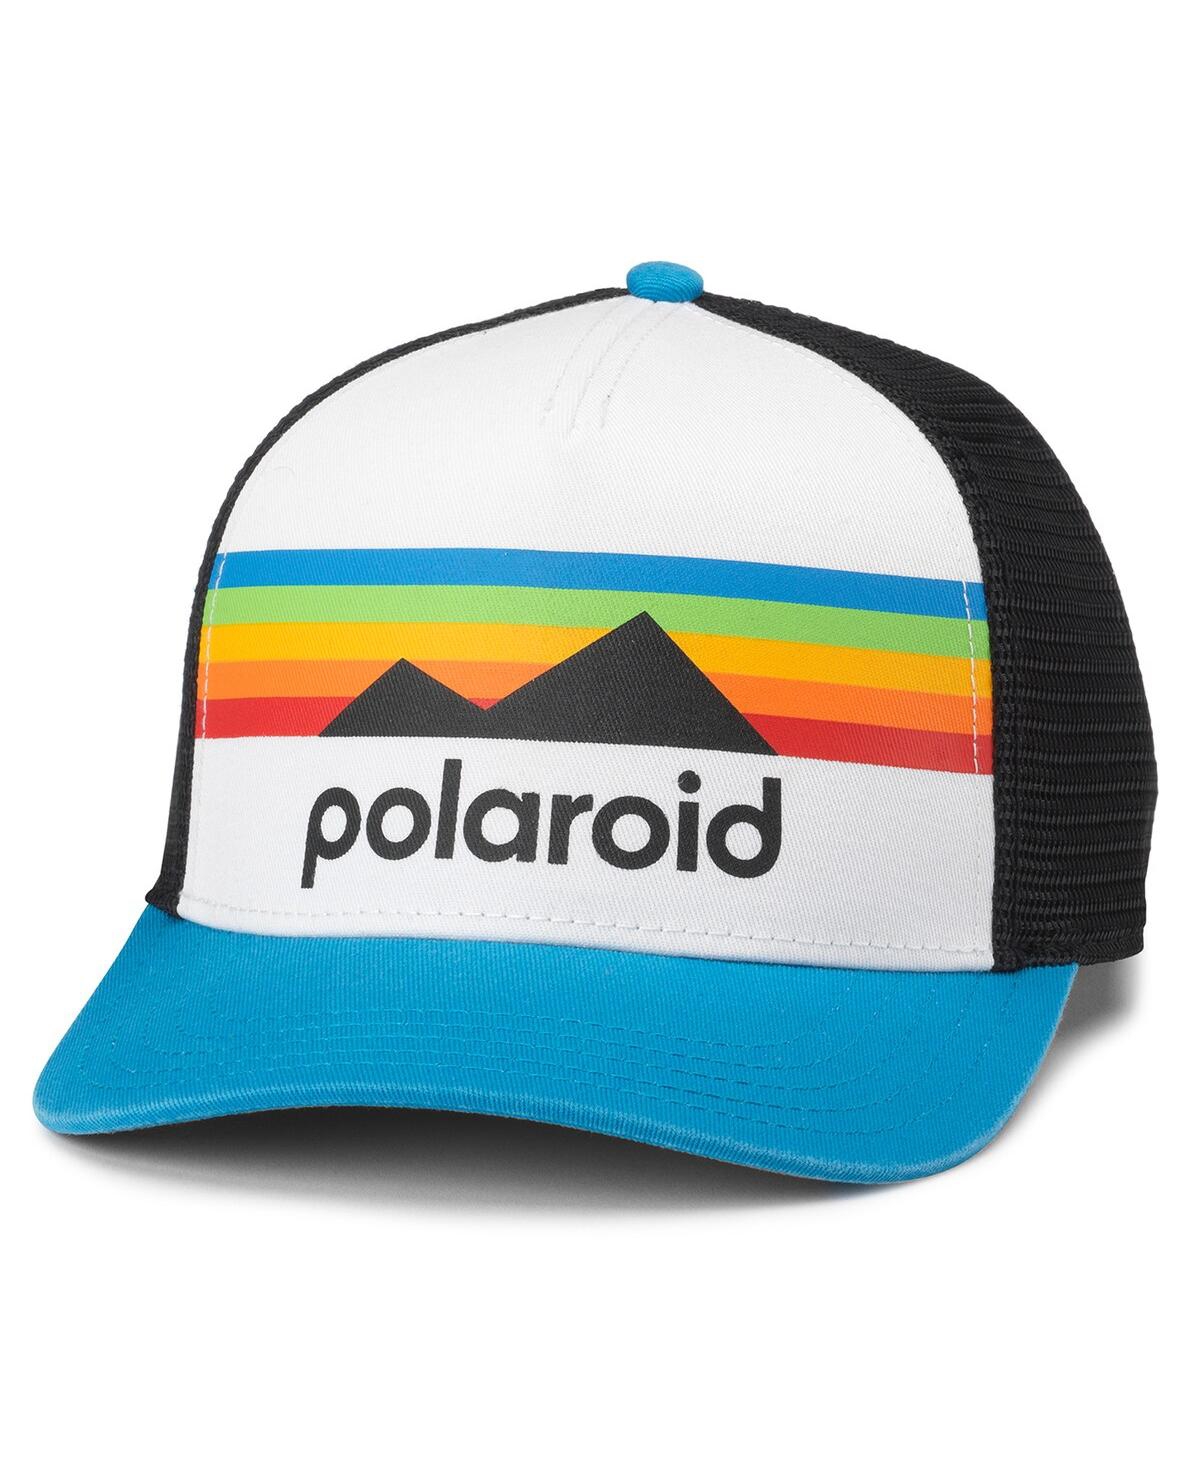 American Needle Men's And Women's  White, Black Polaroid Sinclair Adjustable Hat In Blue